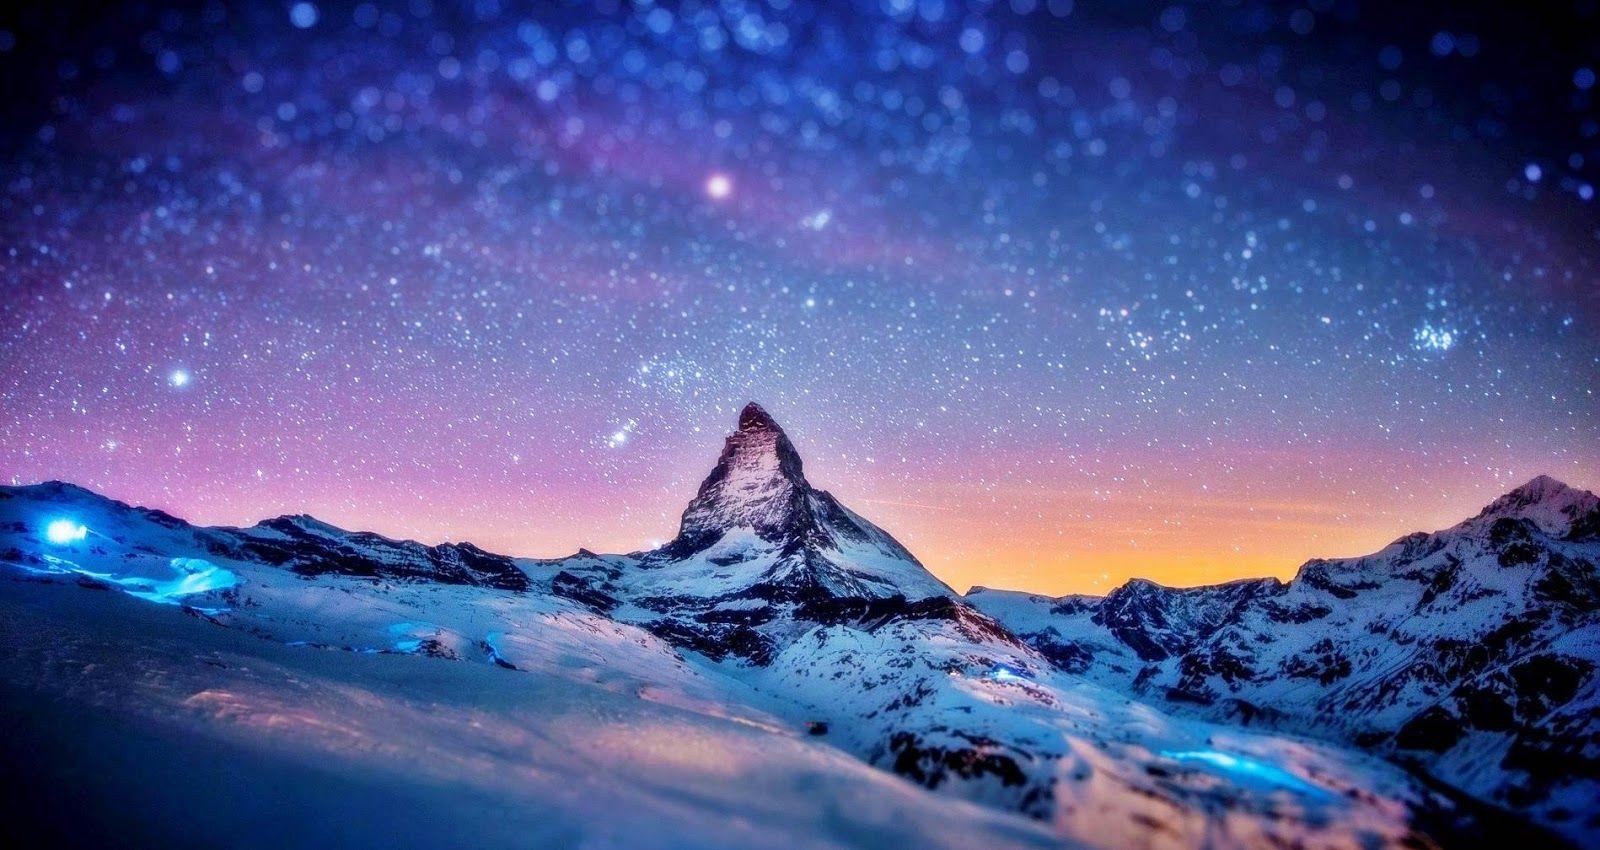 Snow Mountain Wallpaper HD. Snow Mountain in night. Places to